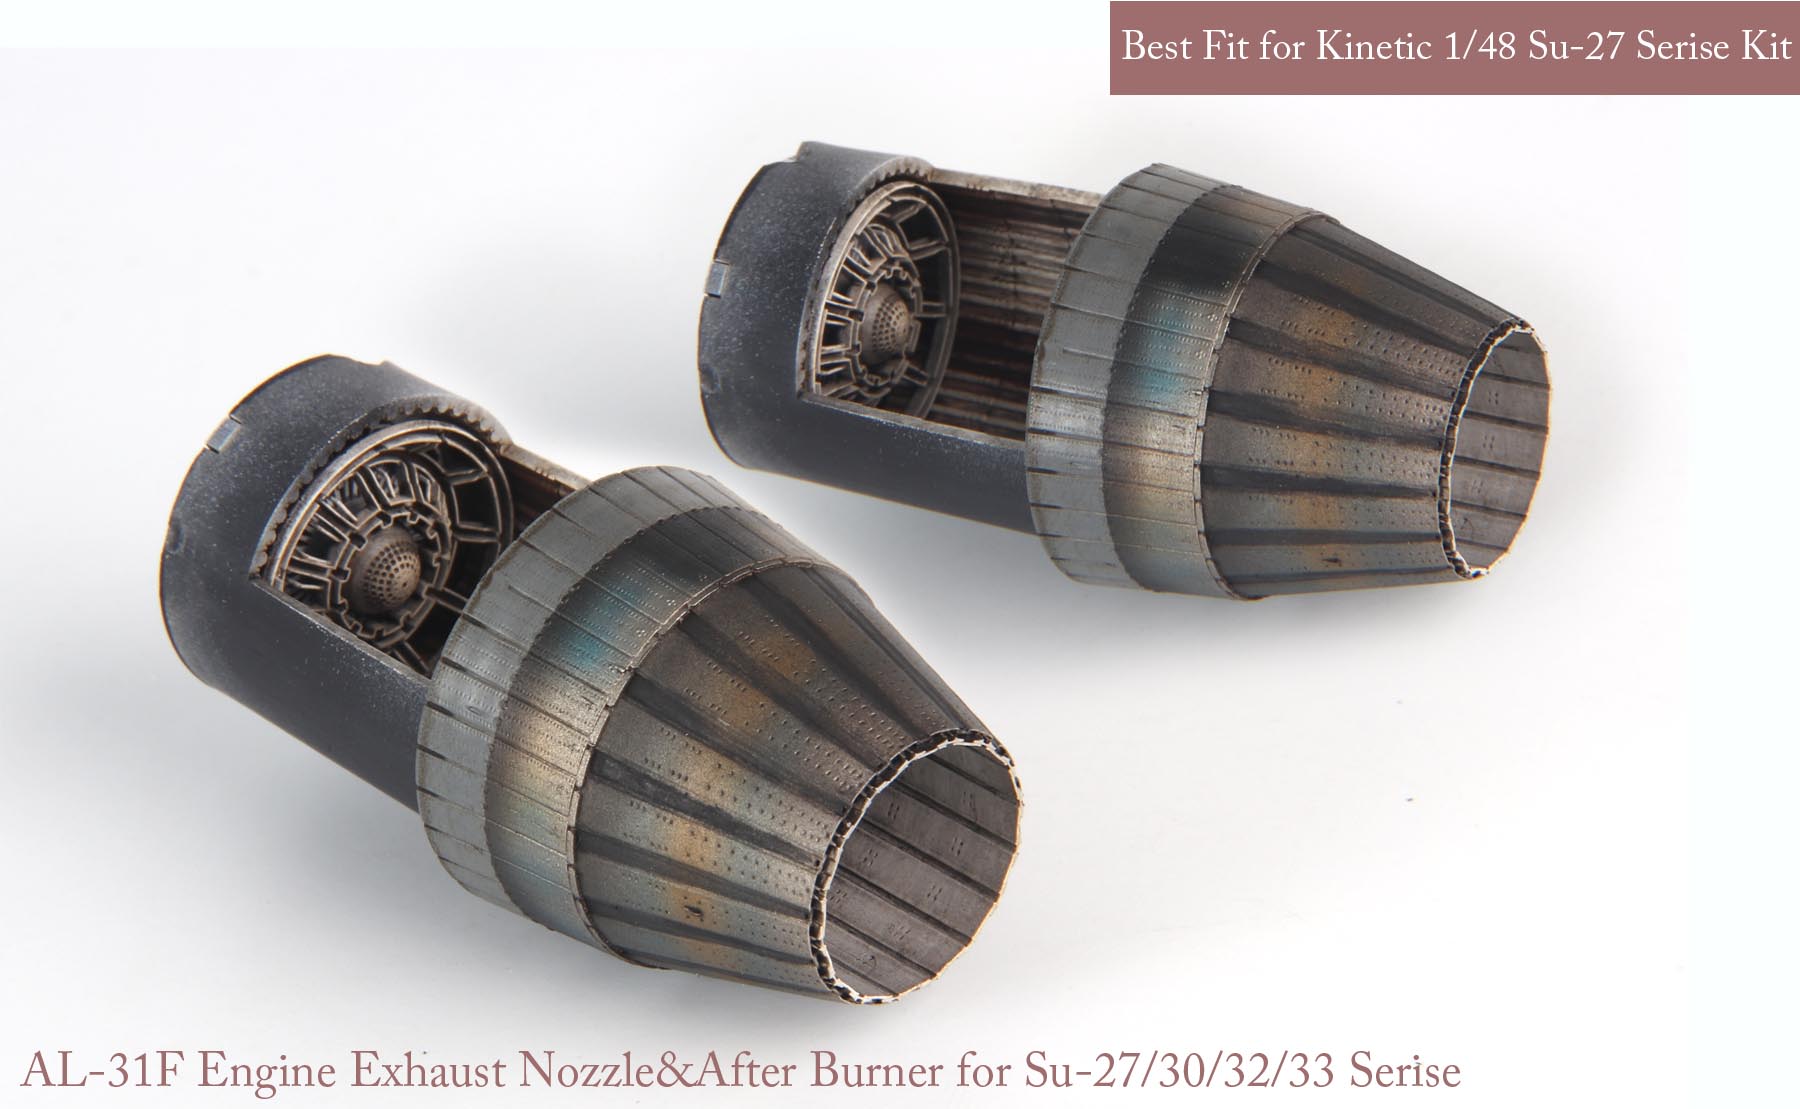 1/48 Su-27/30/33 Nozzle & After Burner Set (Closed) for Kinetic - Click Image to Close